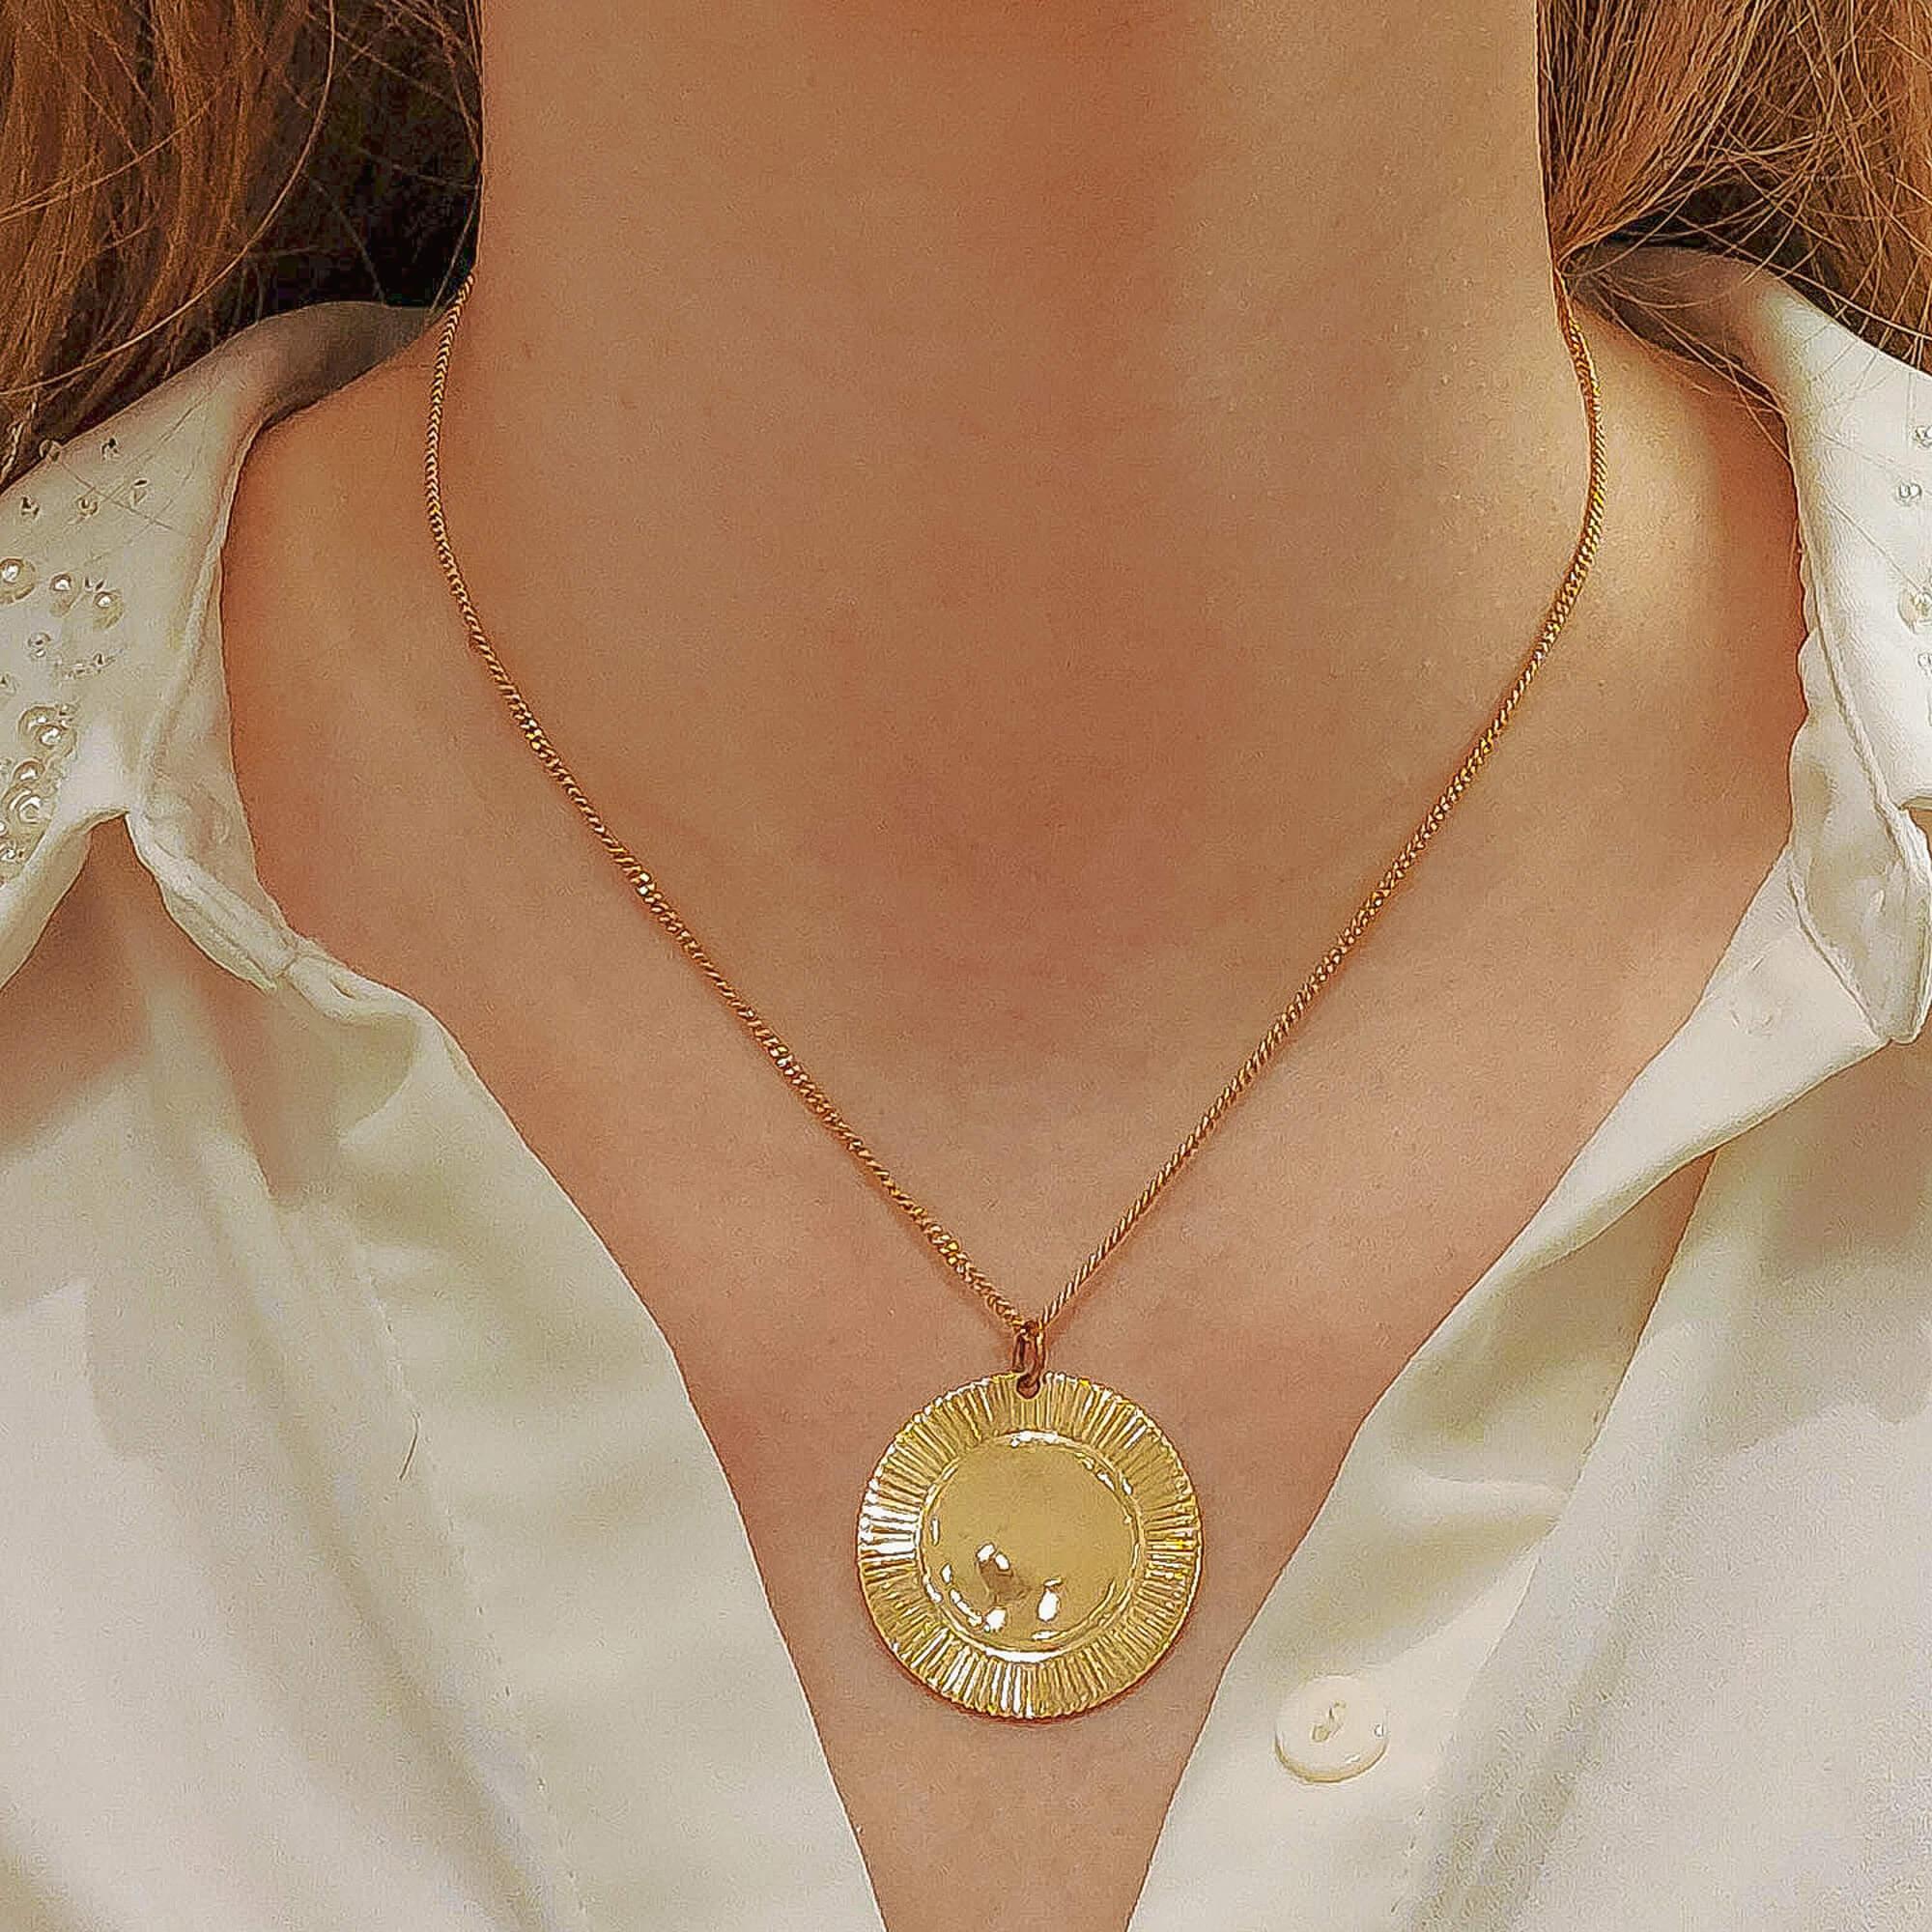 A simple coin/disc pendant made of solid 9k yellow gold. The disc has a lovely ‘crimple’ design around the edge, almost resembling a sun. The back and center have been left bare so that the wearer has to option to customize the disc with engraving